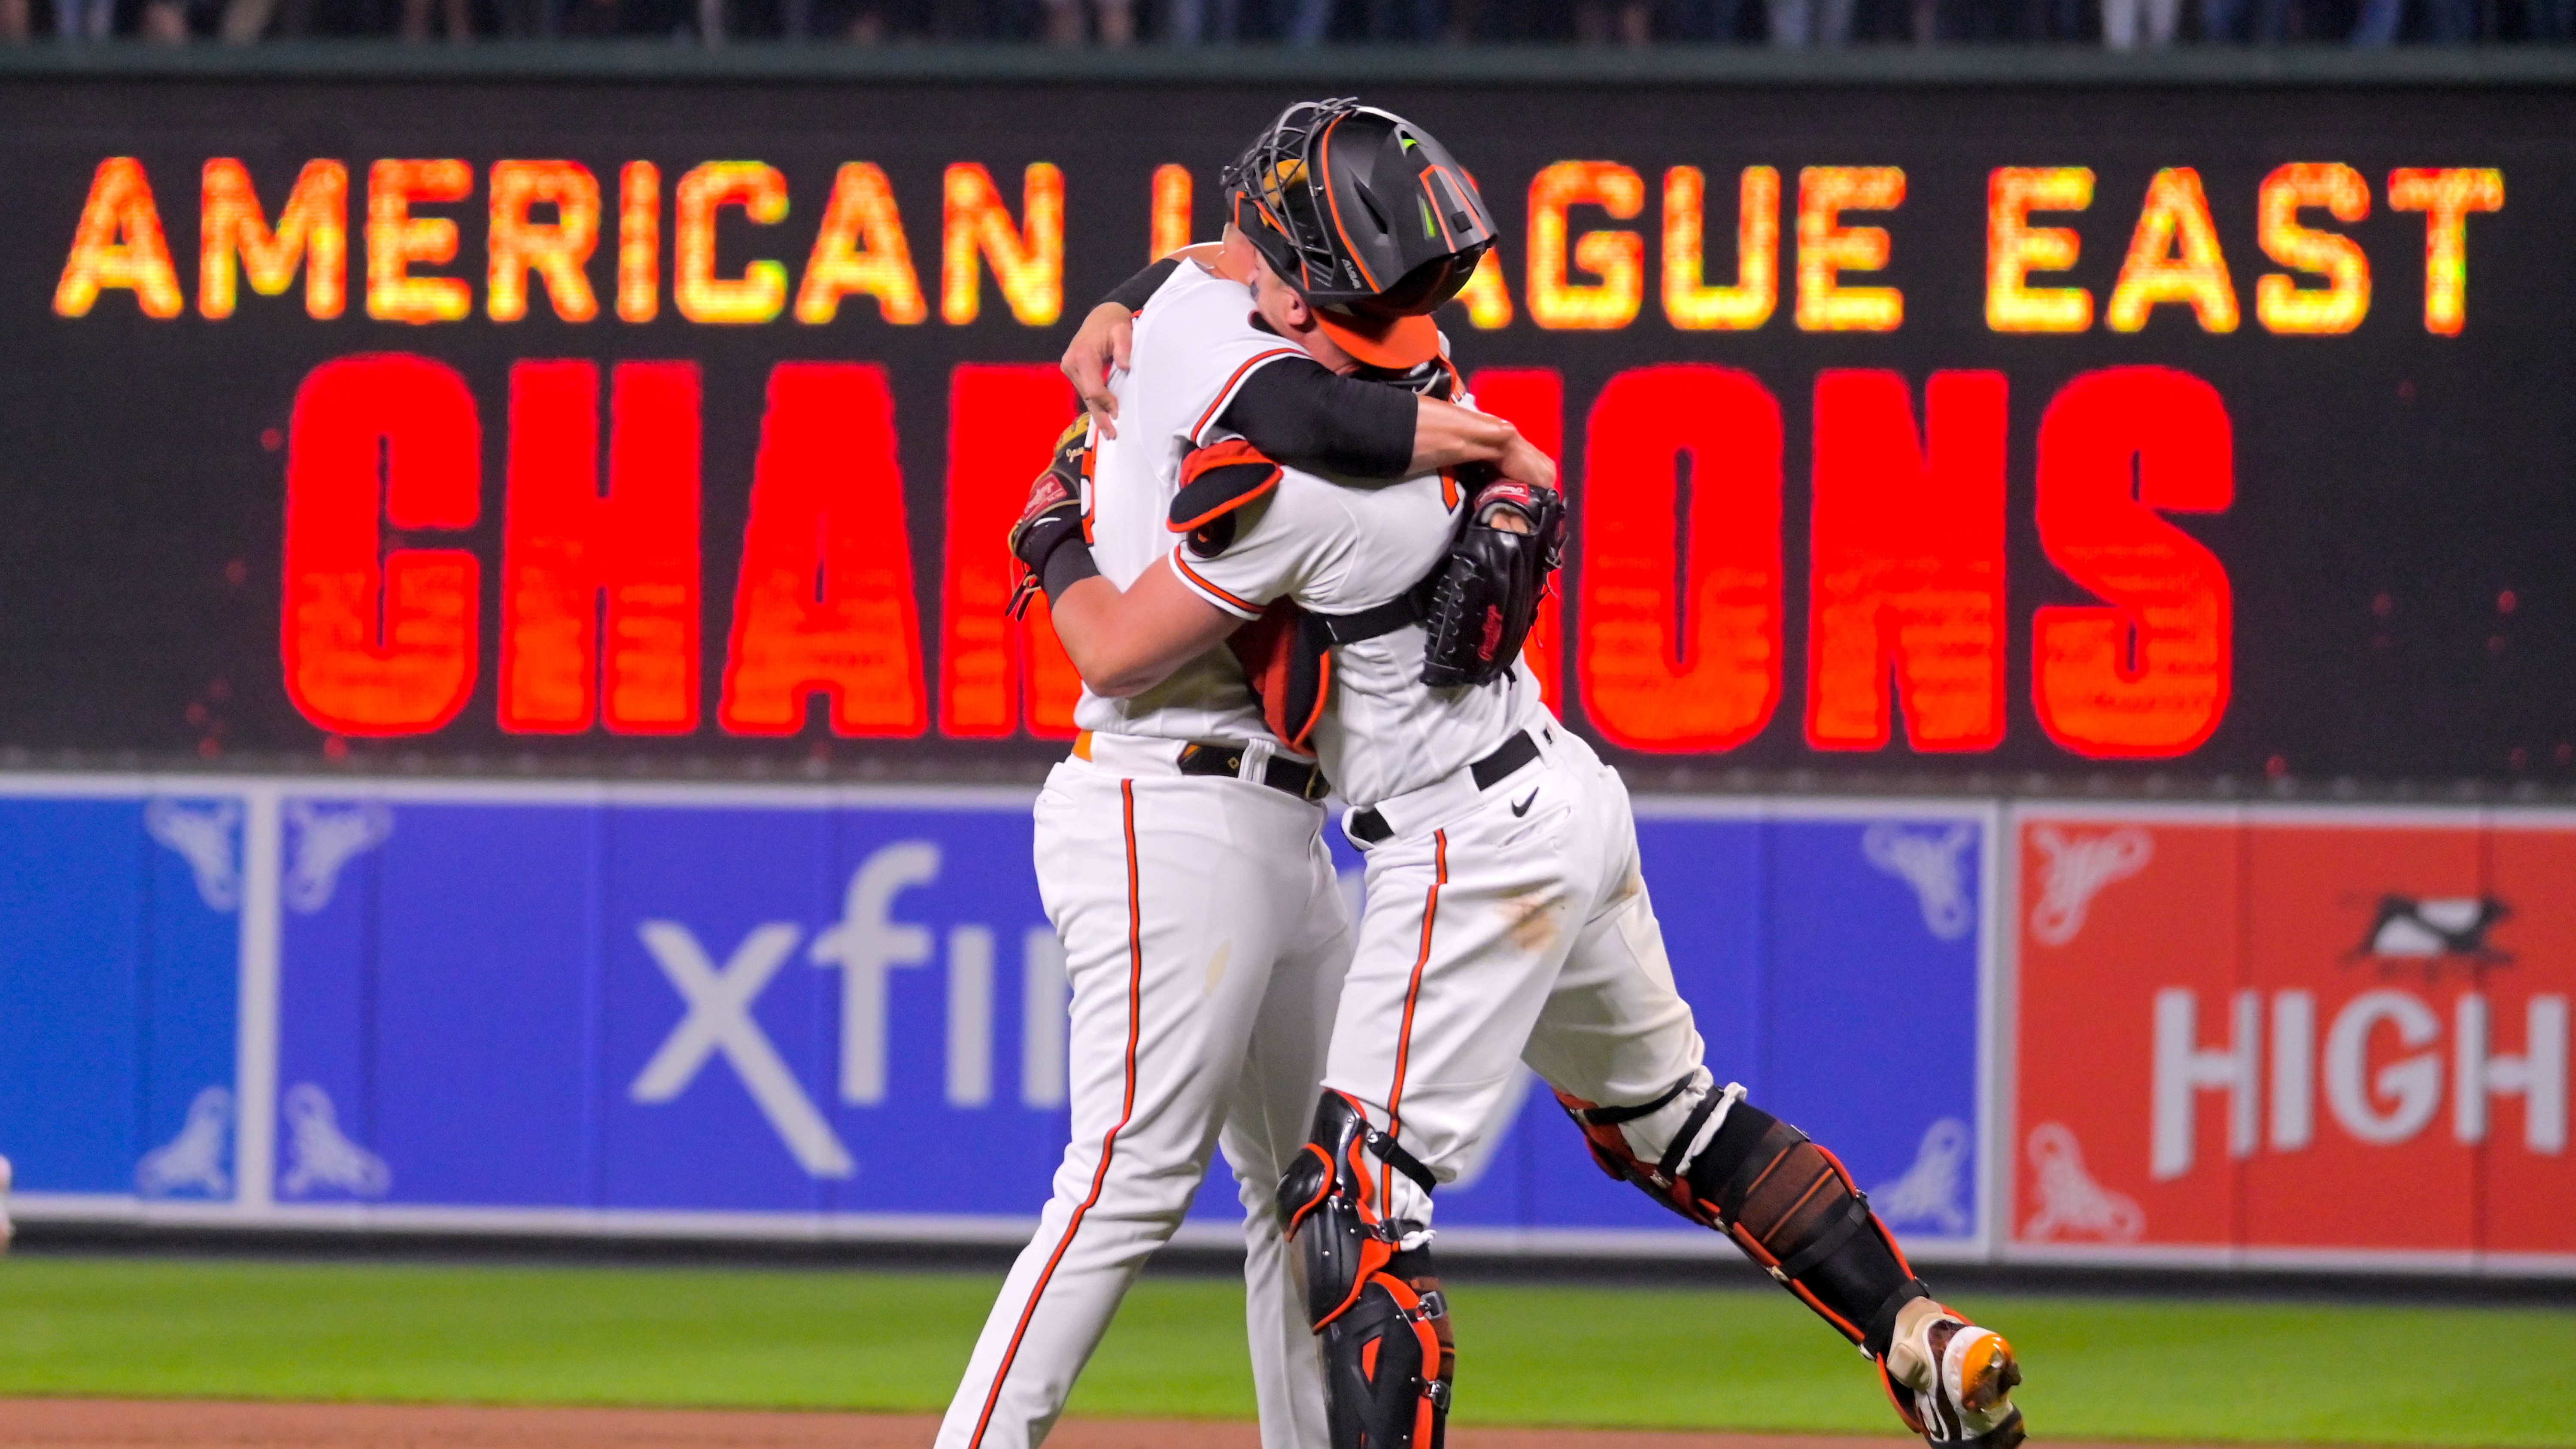 Orioles clinch capturing first AL East title since 2014